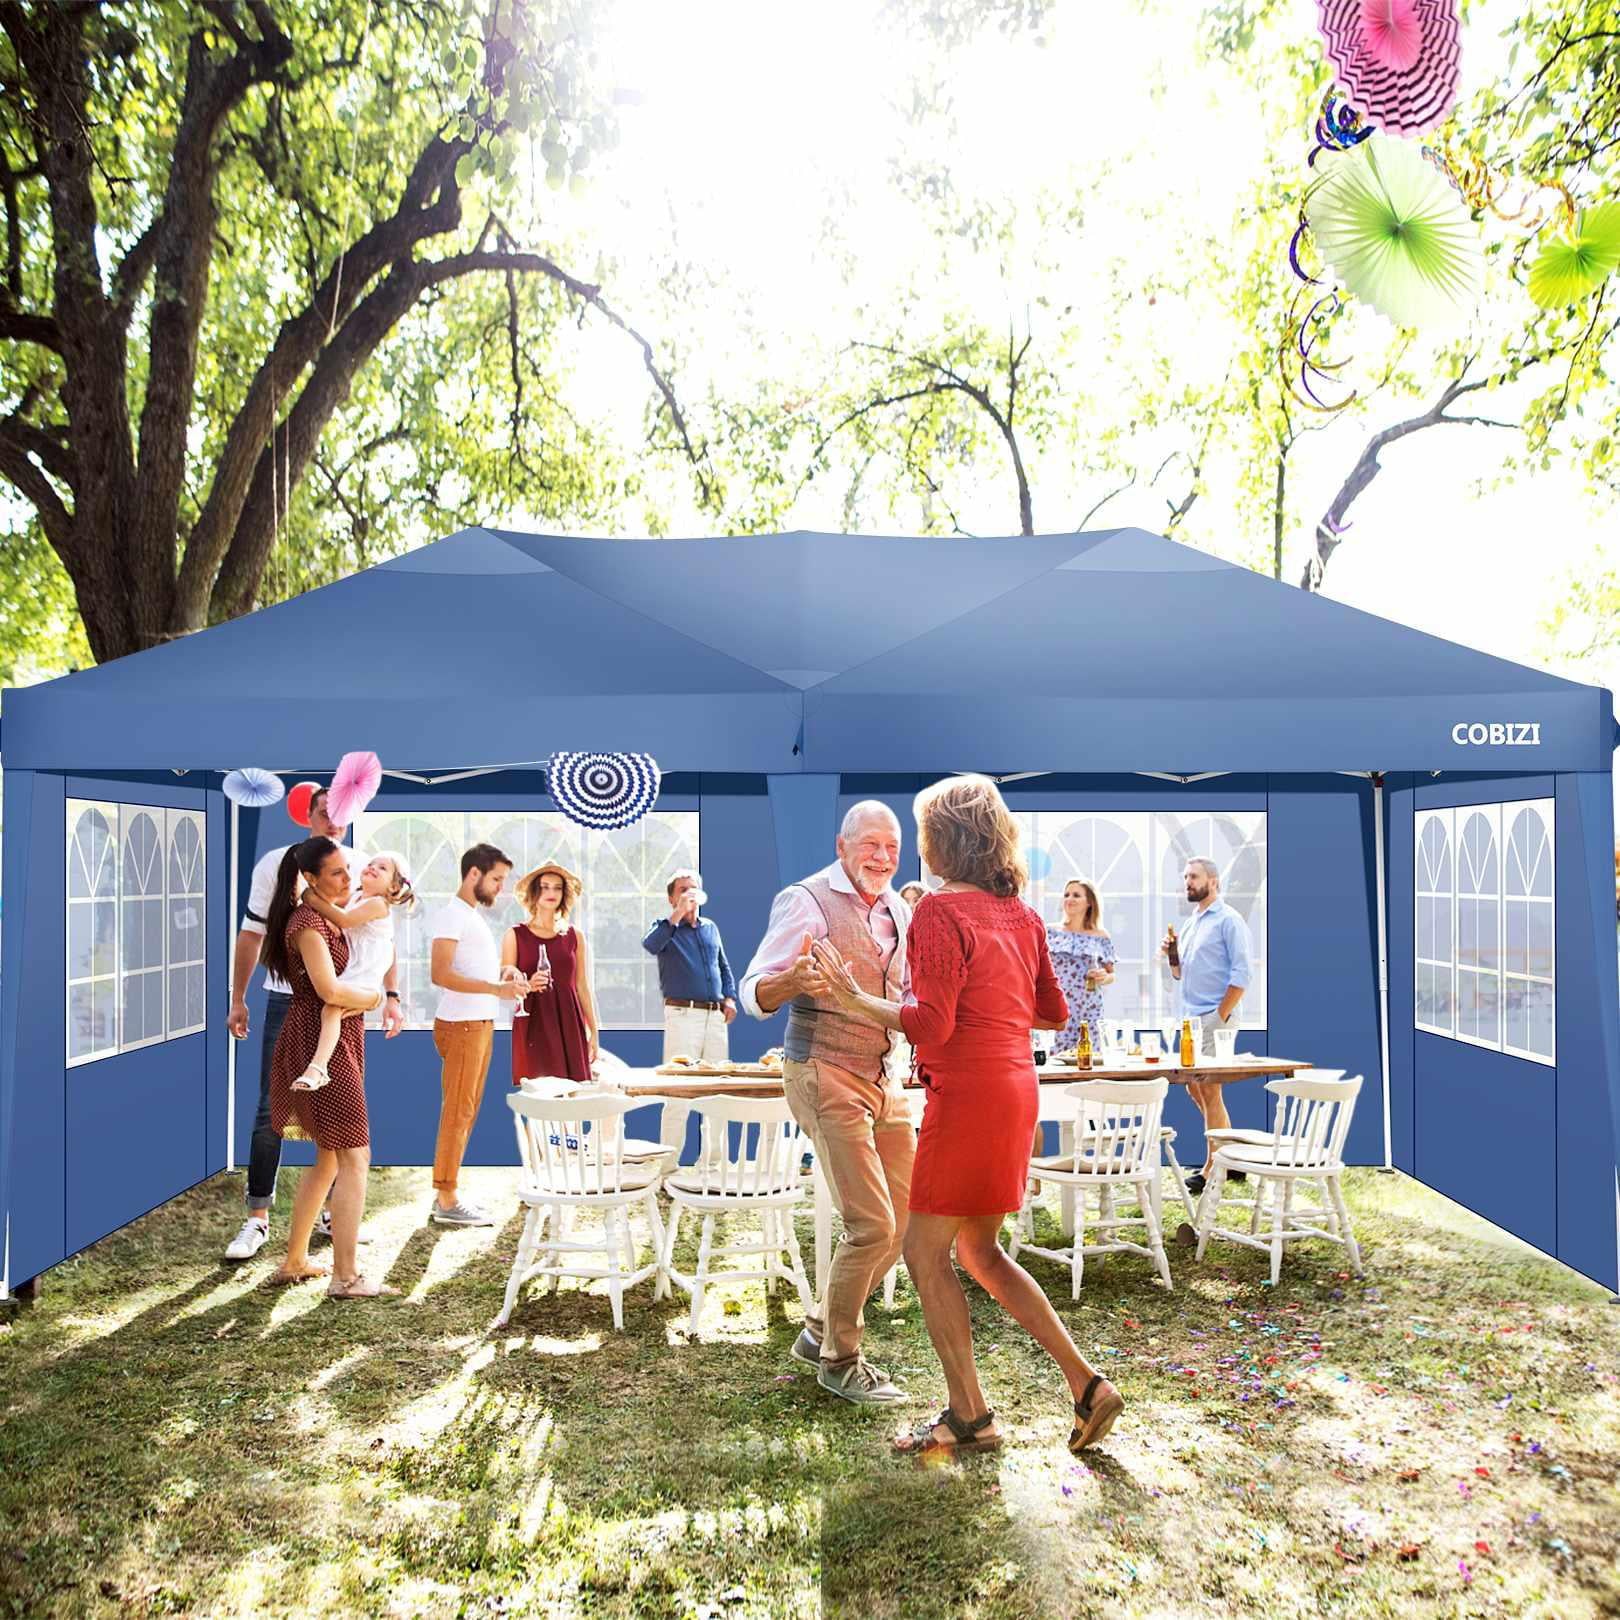 10' x 20' Canopy Tent EZ Pop Up Party Tent Portable Instant Commercial Heavy Duty Outdoor Market Shelter Gazebo with 6 Removable Sidewalls and Carry Bag, Blue